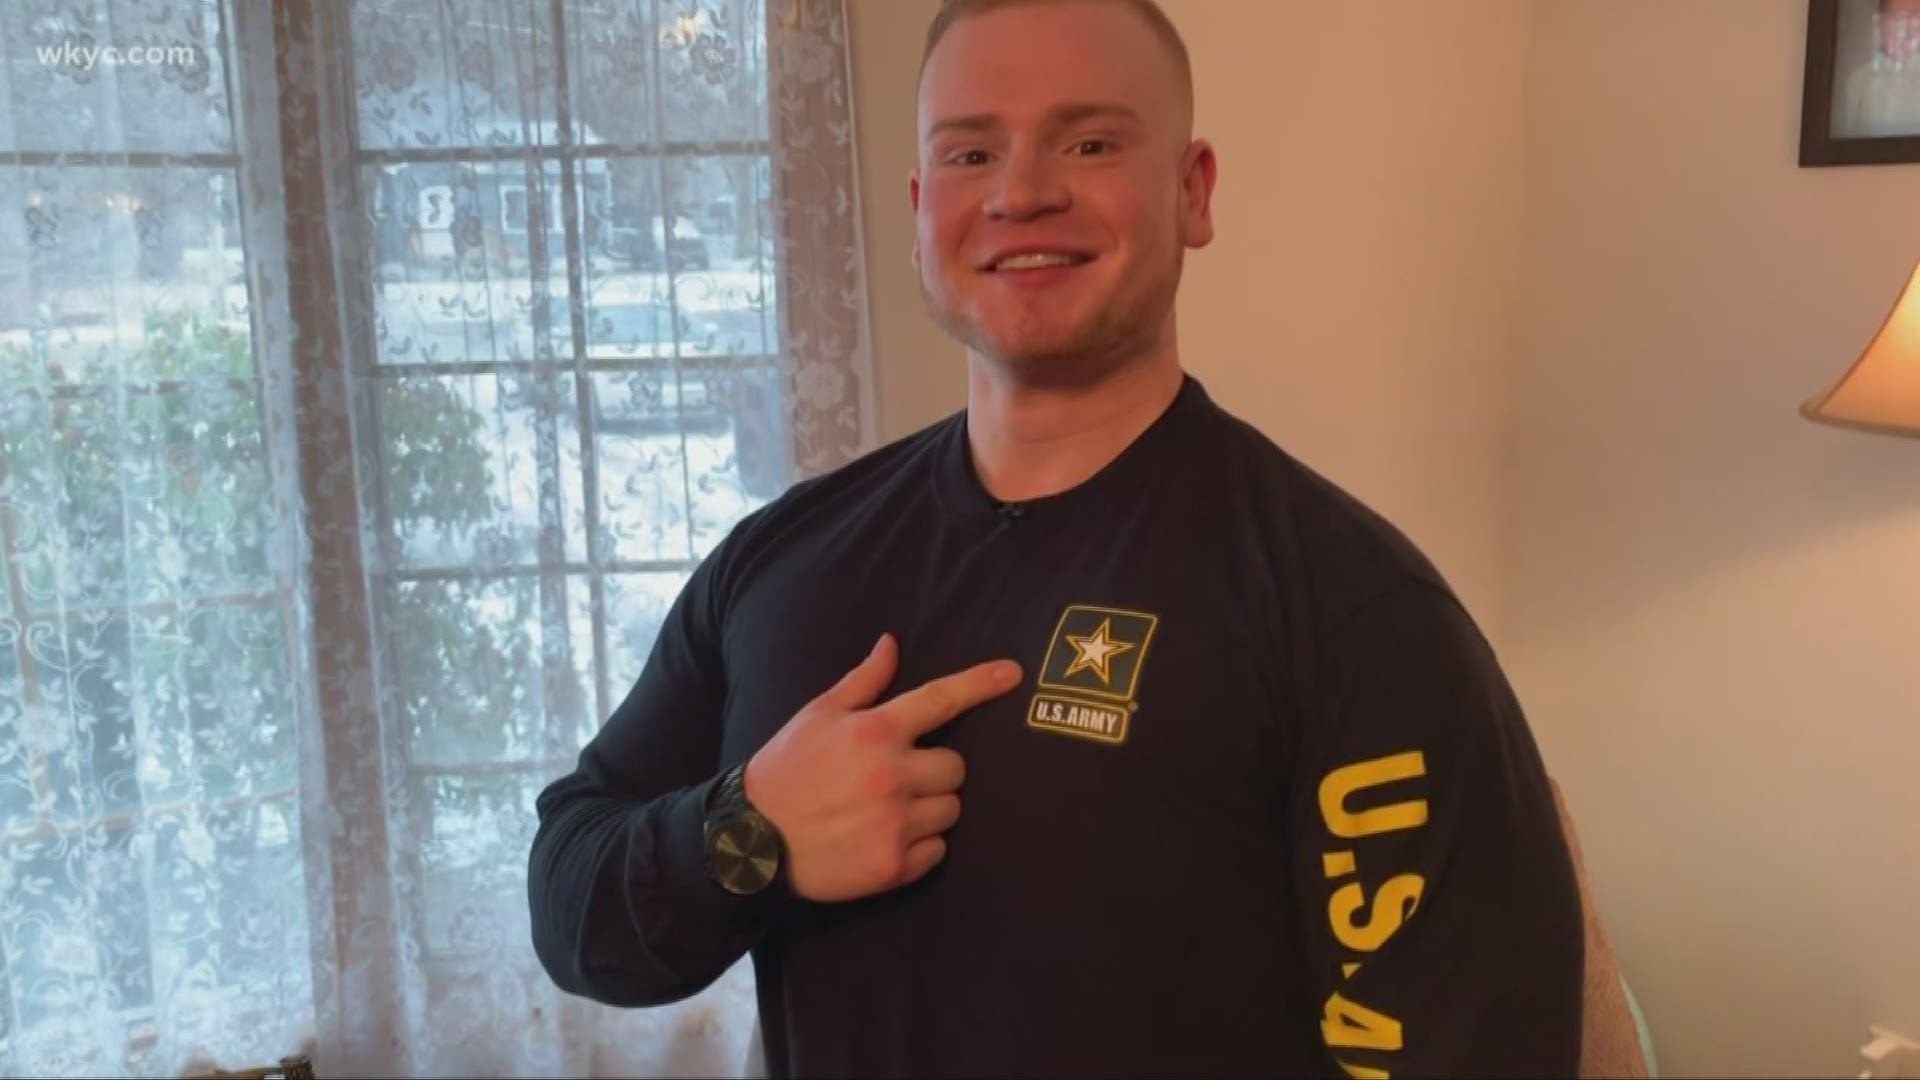 This is Matthew Logsdon. At his heaviest, he weighed 345 pounds, and his dream of joining the military seemed so far away. But then, his life changed in an epic way.